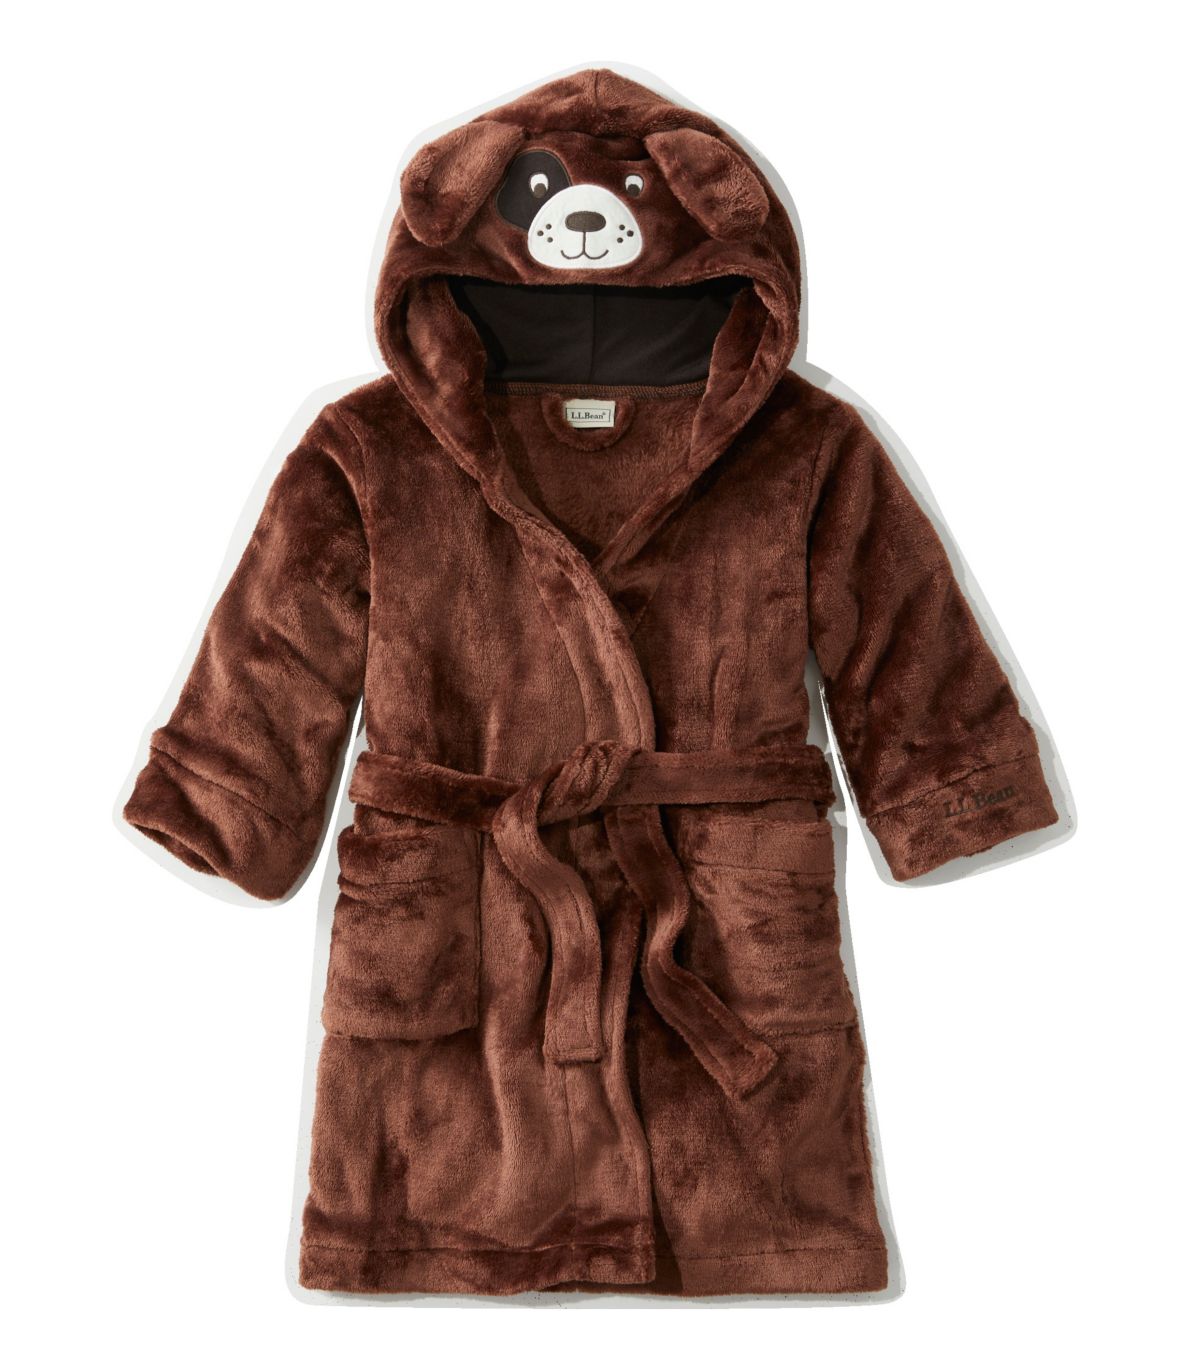 Toddlers' Cozy Animal Robe, Hooded